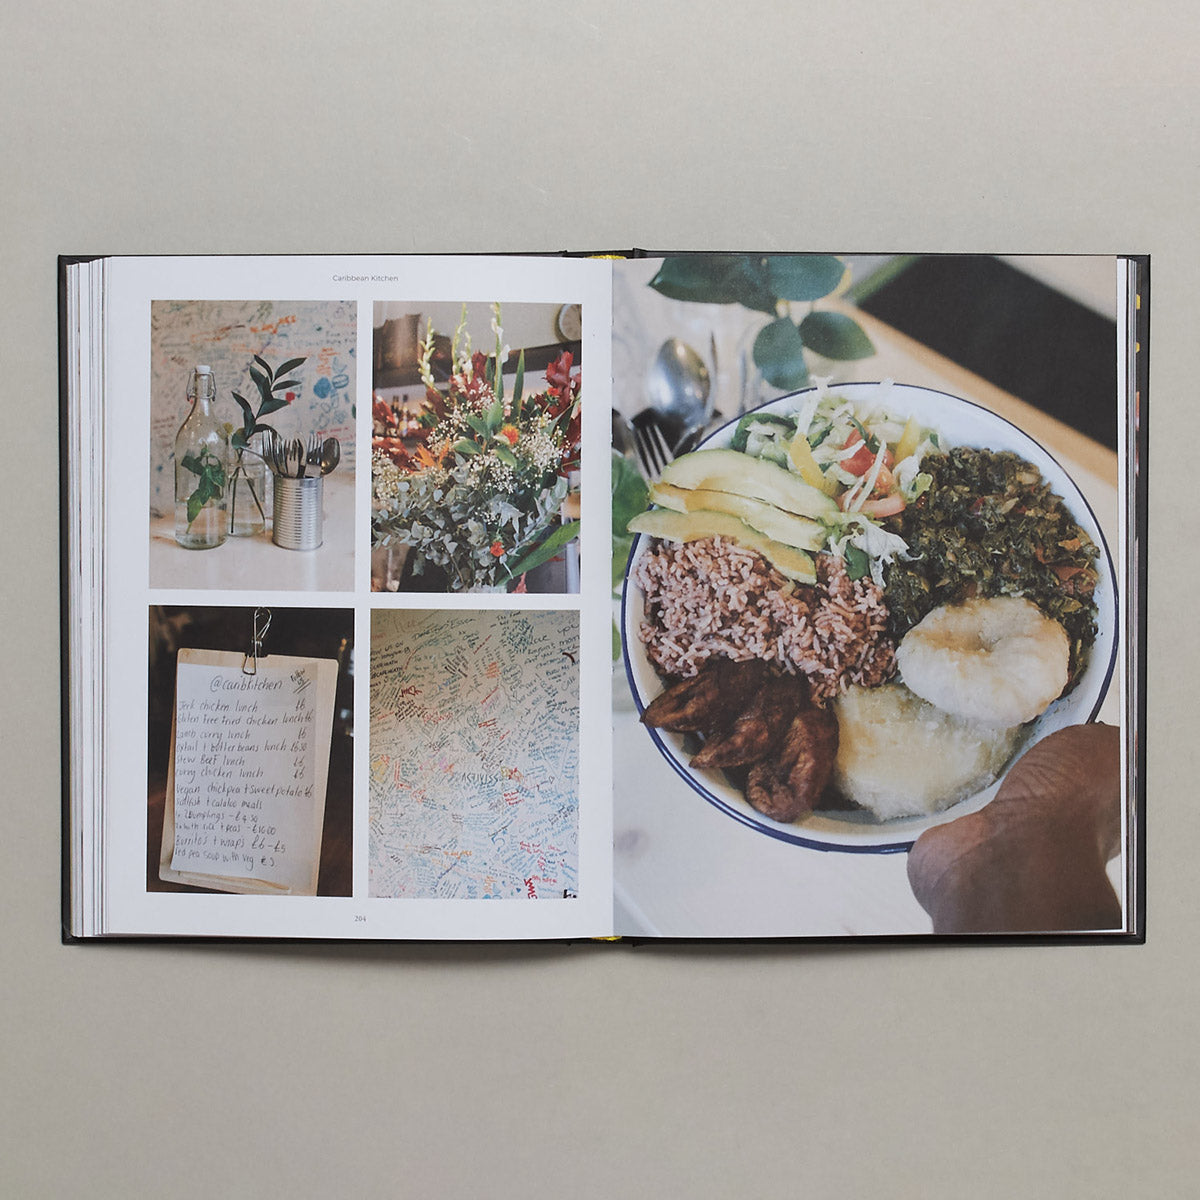 Riaz Phillips – Belly Full: Carribbean Food In The UK (2nd Edition)